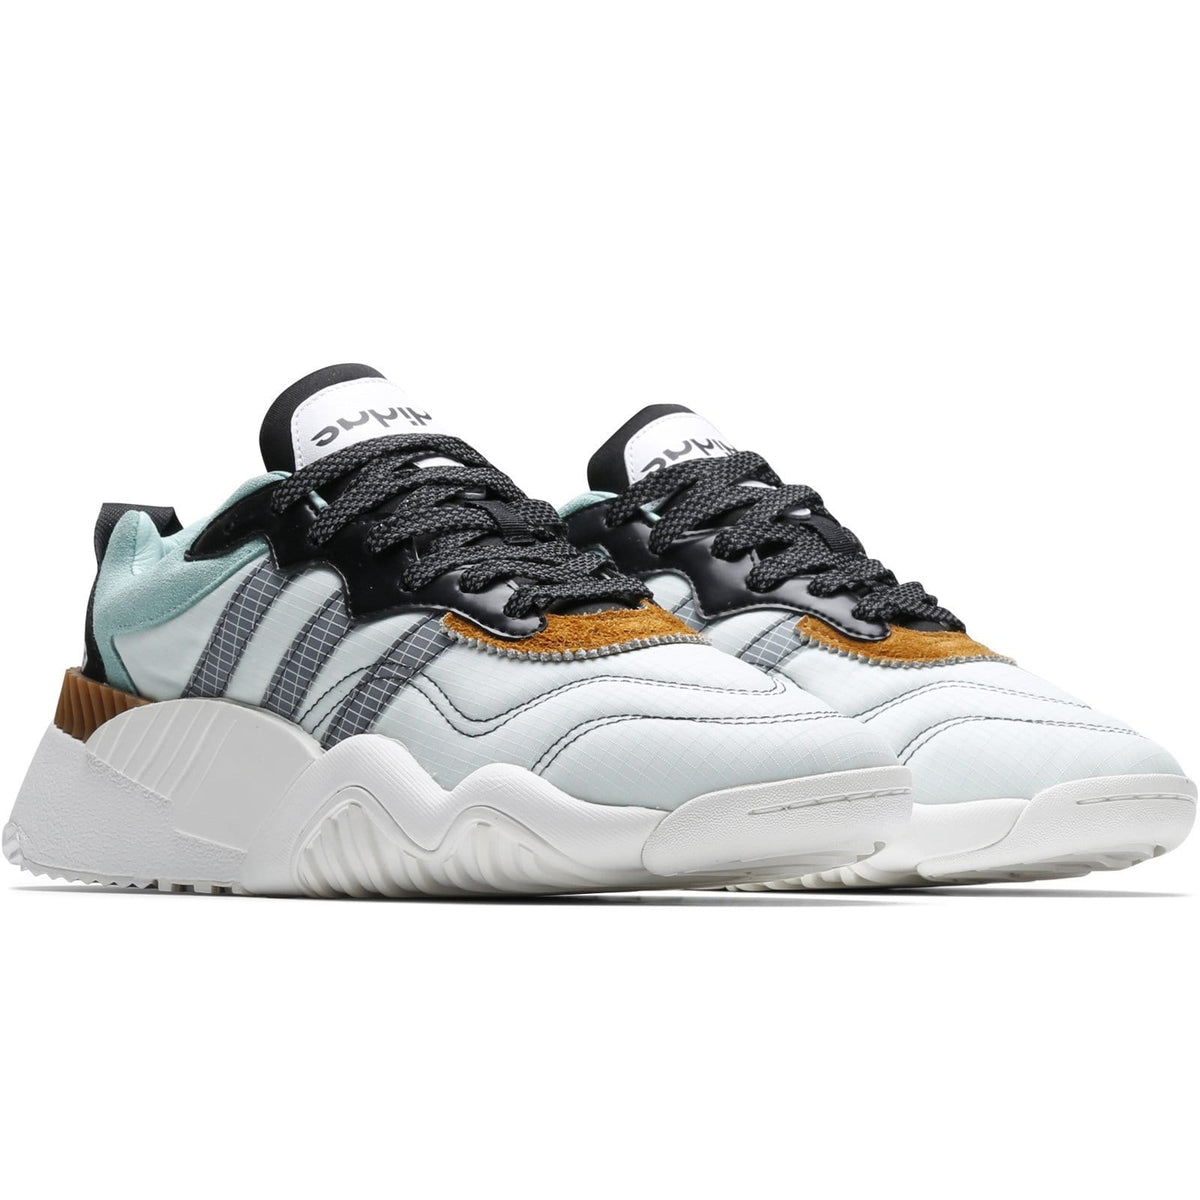 adidas by alexander wang aw turnout trainer